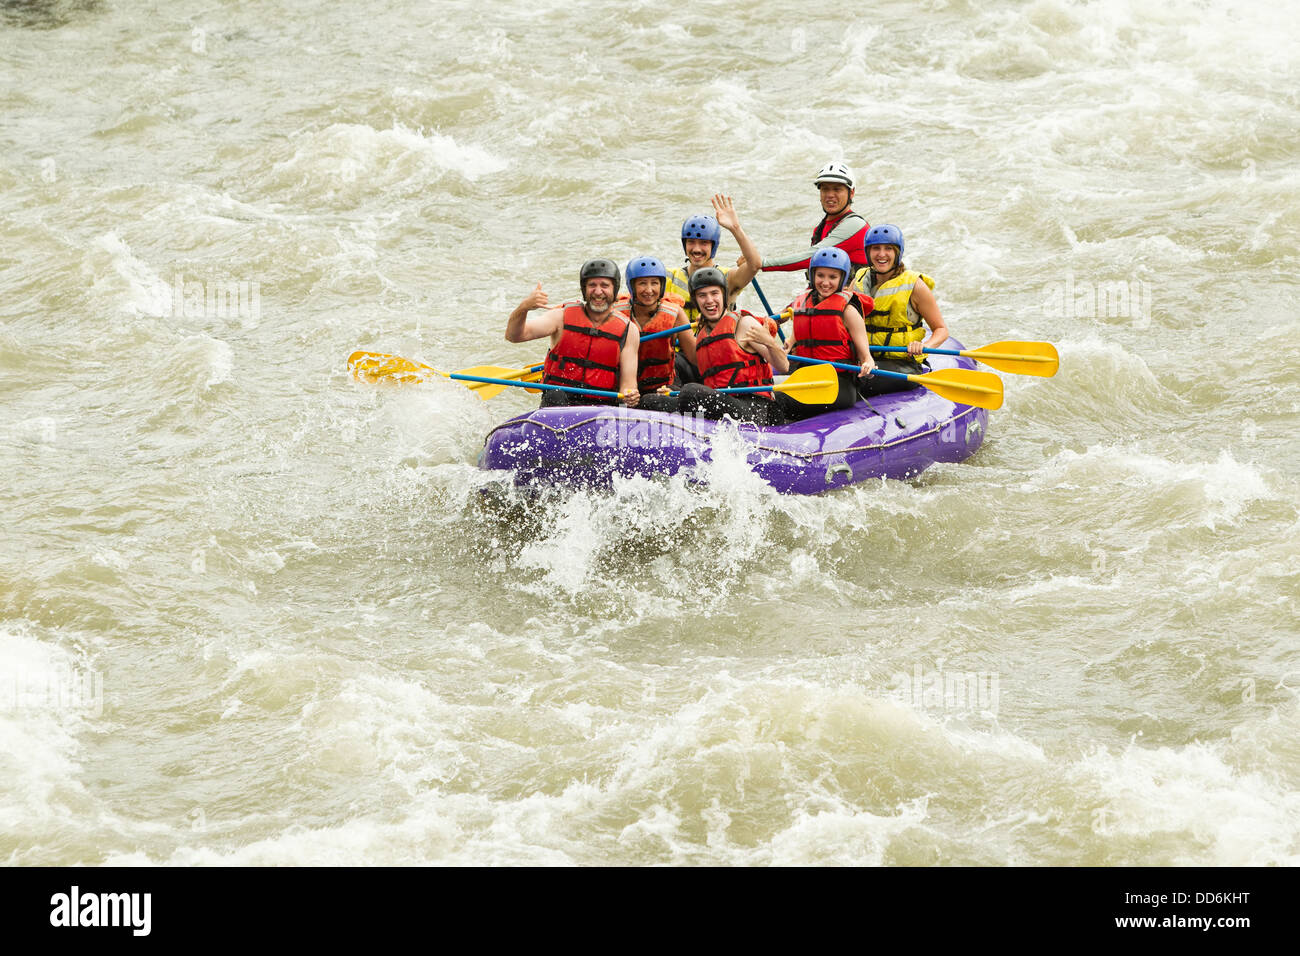 Whitewater Rafting Boat Group Of Seven People Stock Photo